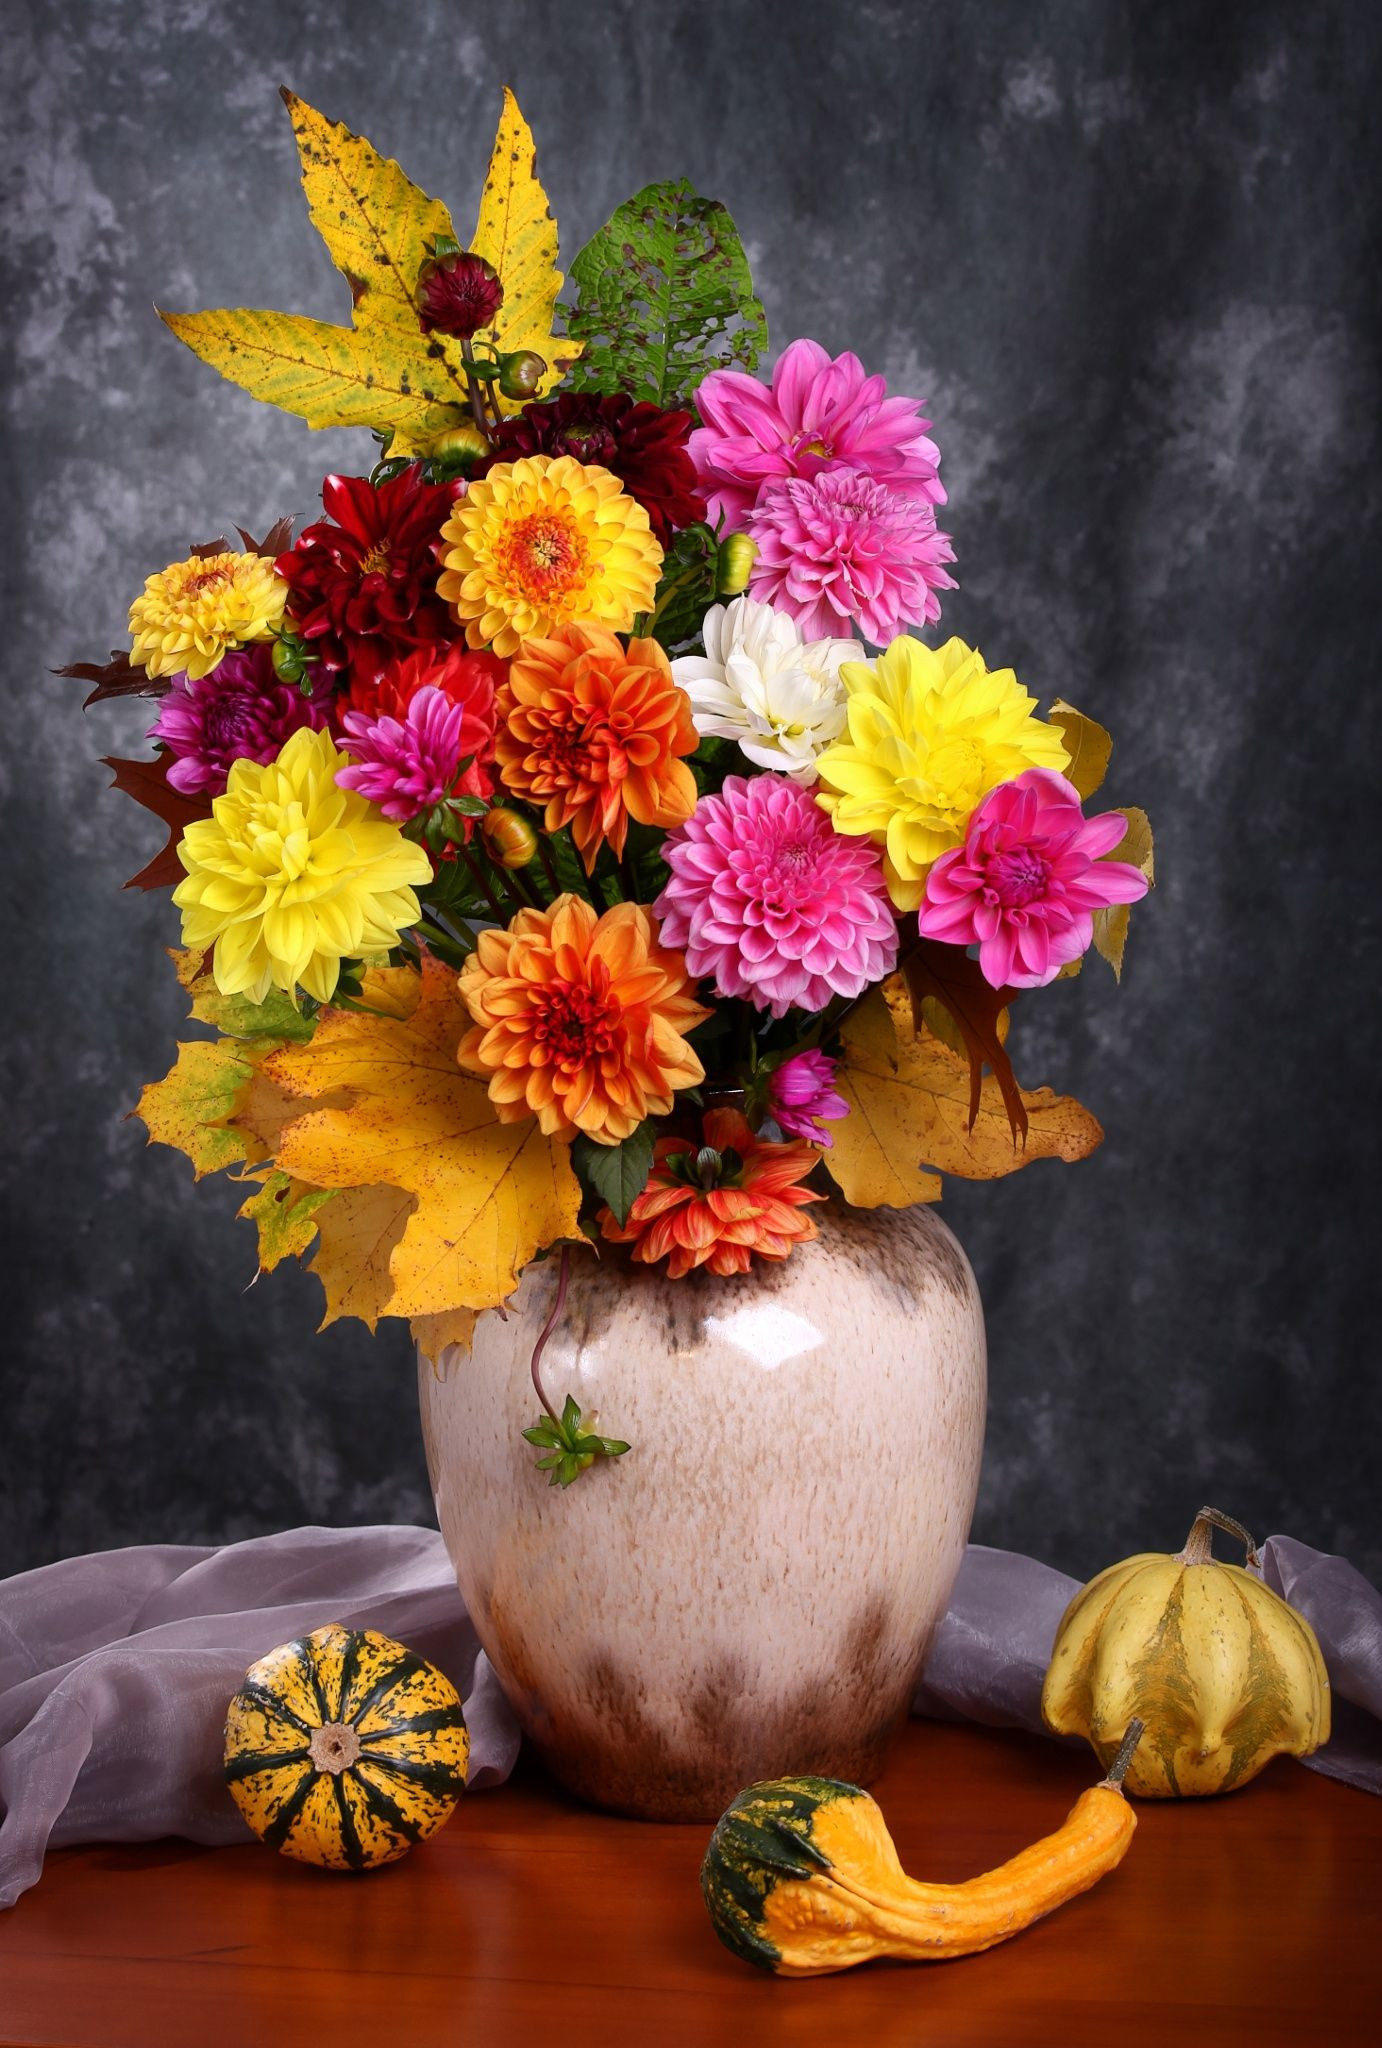 11 Great Victorian Flower Vase 2024 free download victorian flower vase of still life with autumn chrysanthemum flowers in a vase special within still life with autumn chrysanthemum flowers in a vase